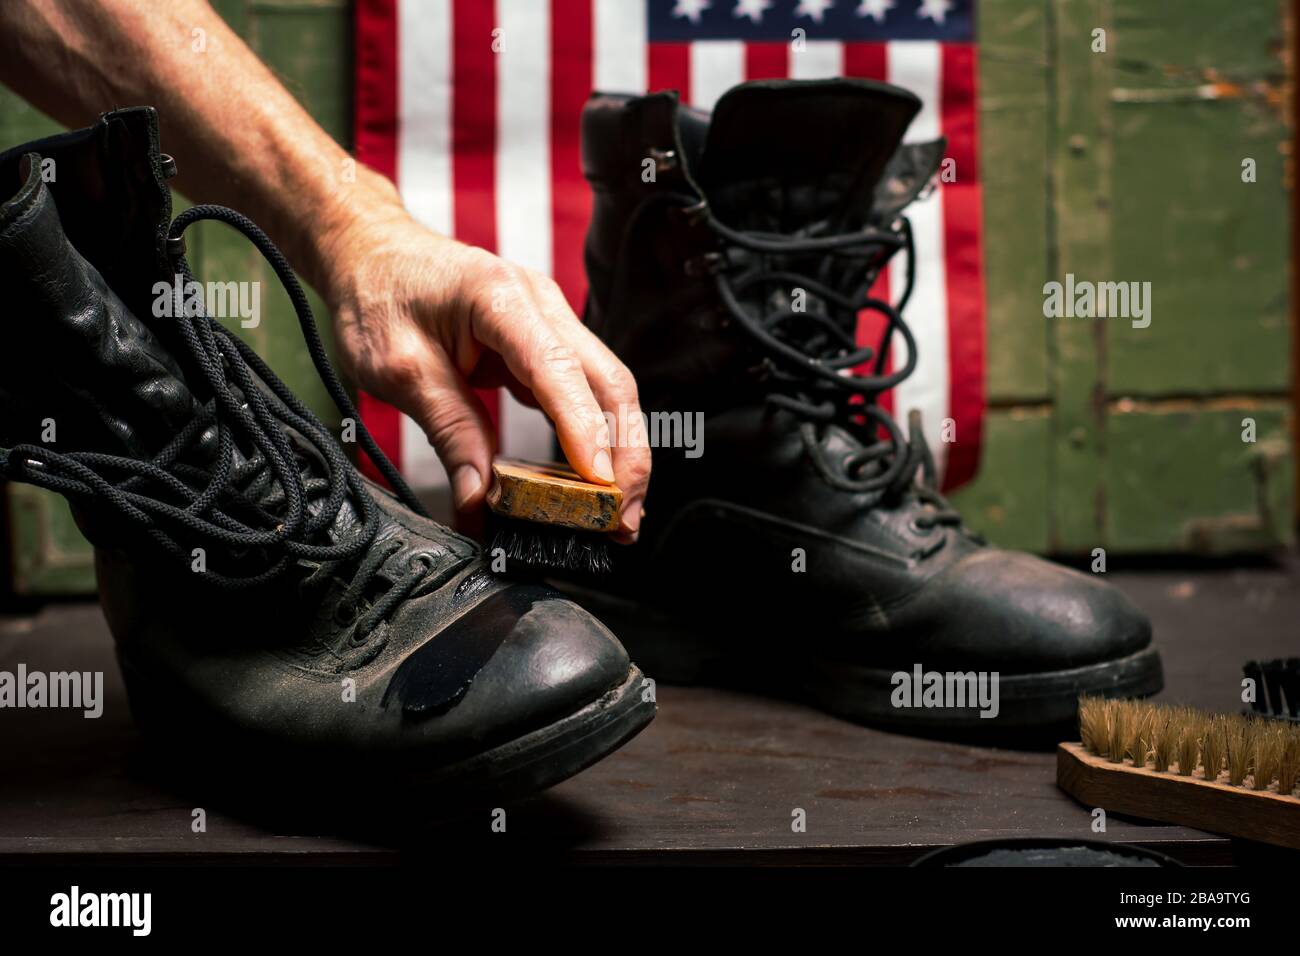 Man polishing vintage military boots in front of USA flag Stock Photo